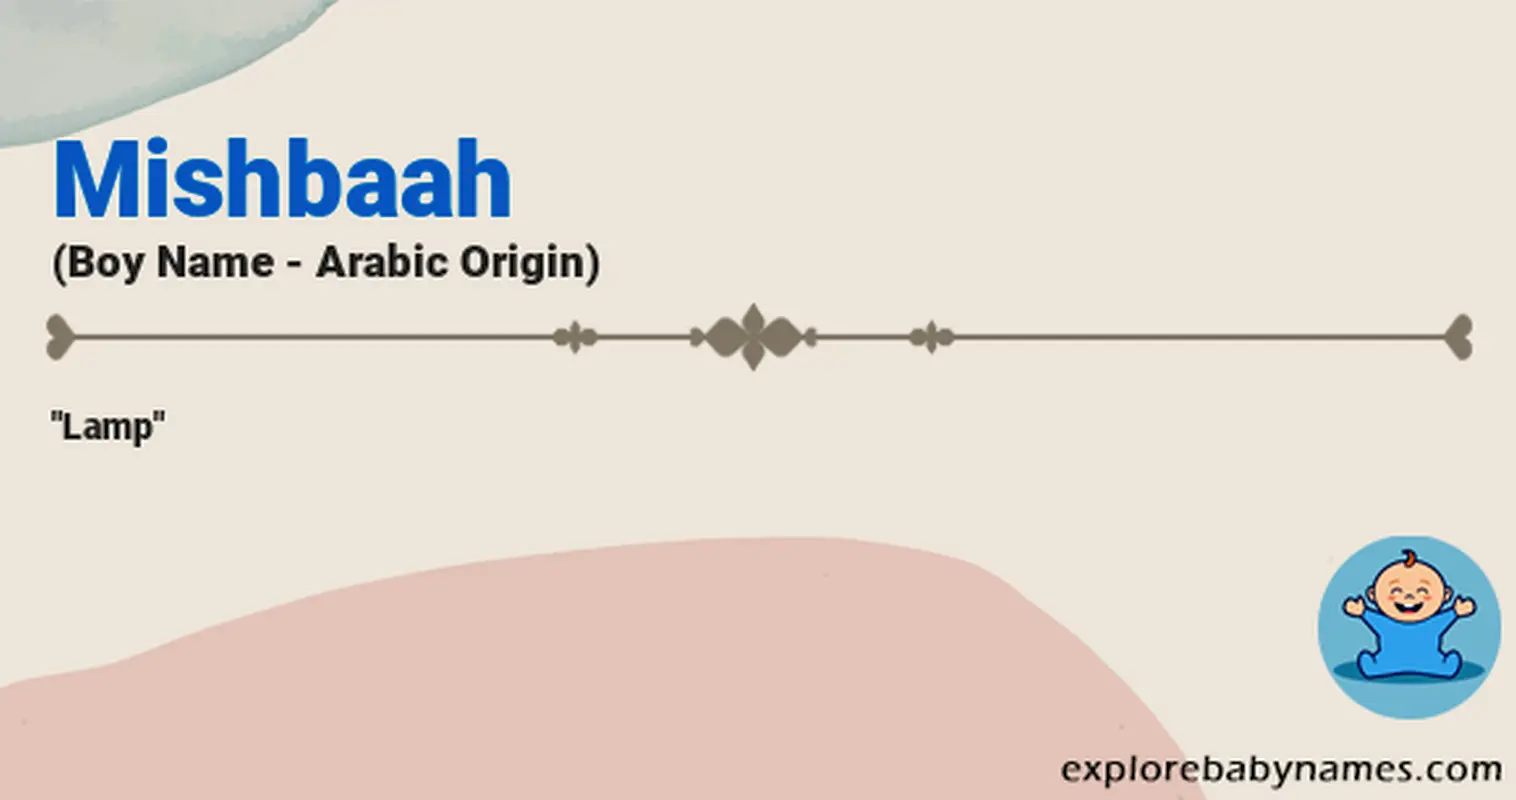 Meaning of Mishbaah